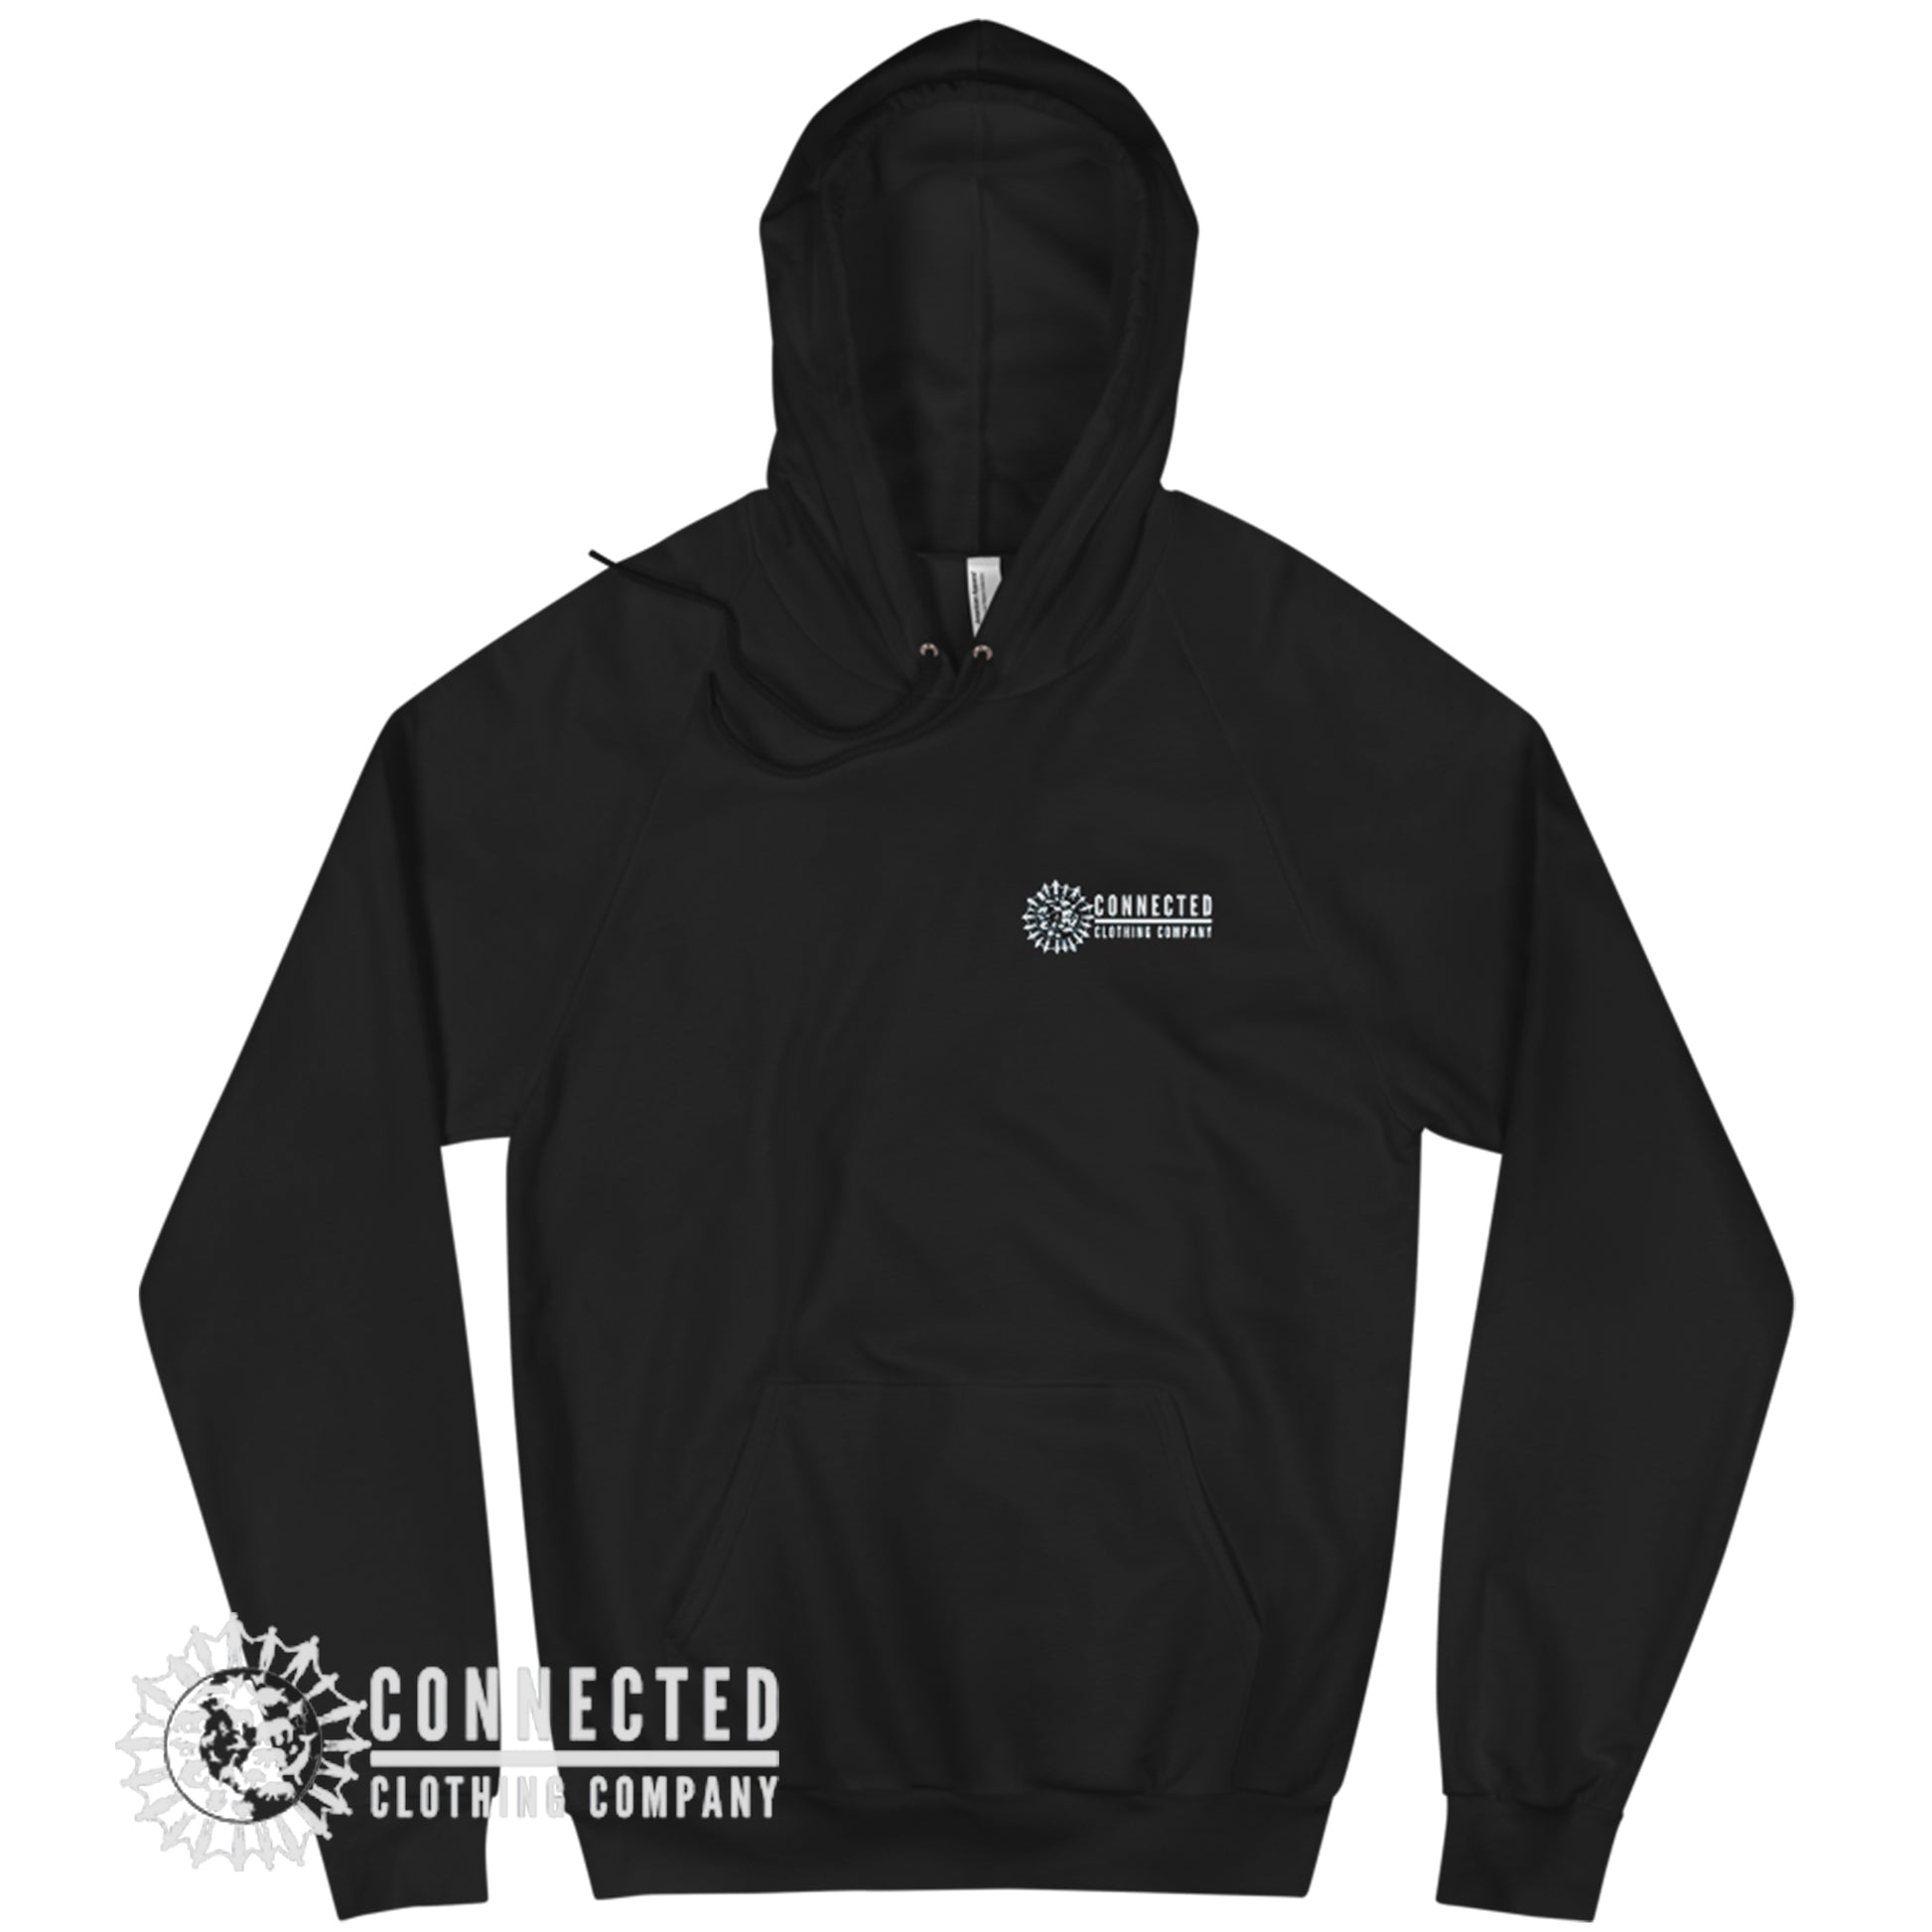 Front of Black Show Humanity Unisex Hoodie with Connected Logo print - Connected Clothing Company - Ethically and Sustainably Made - 10% donated to